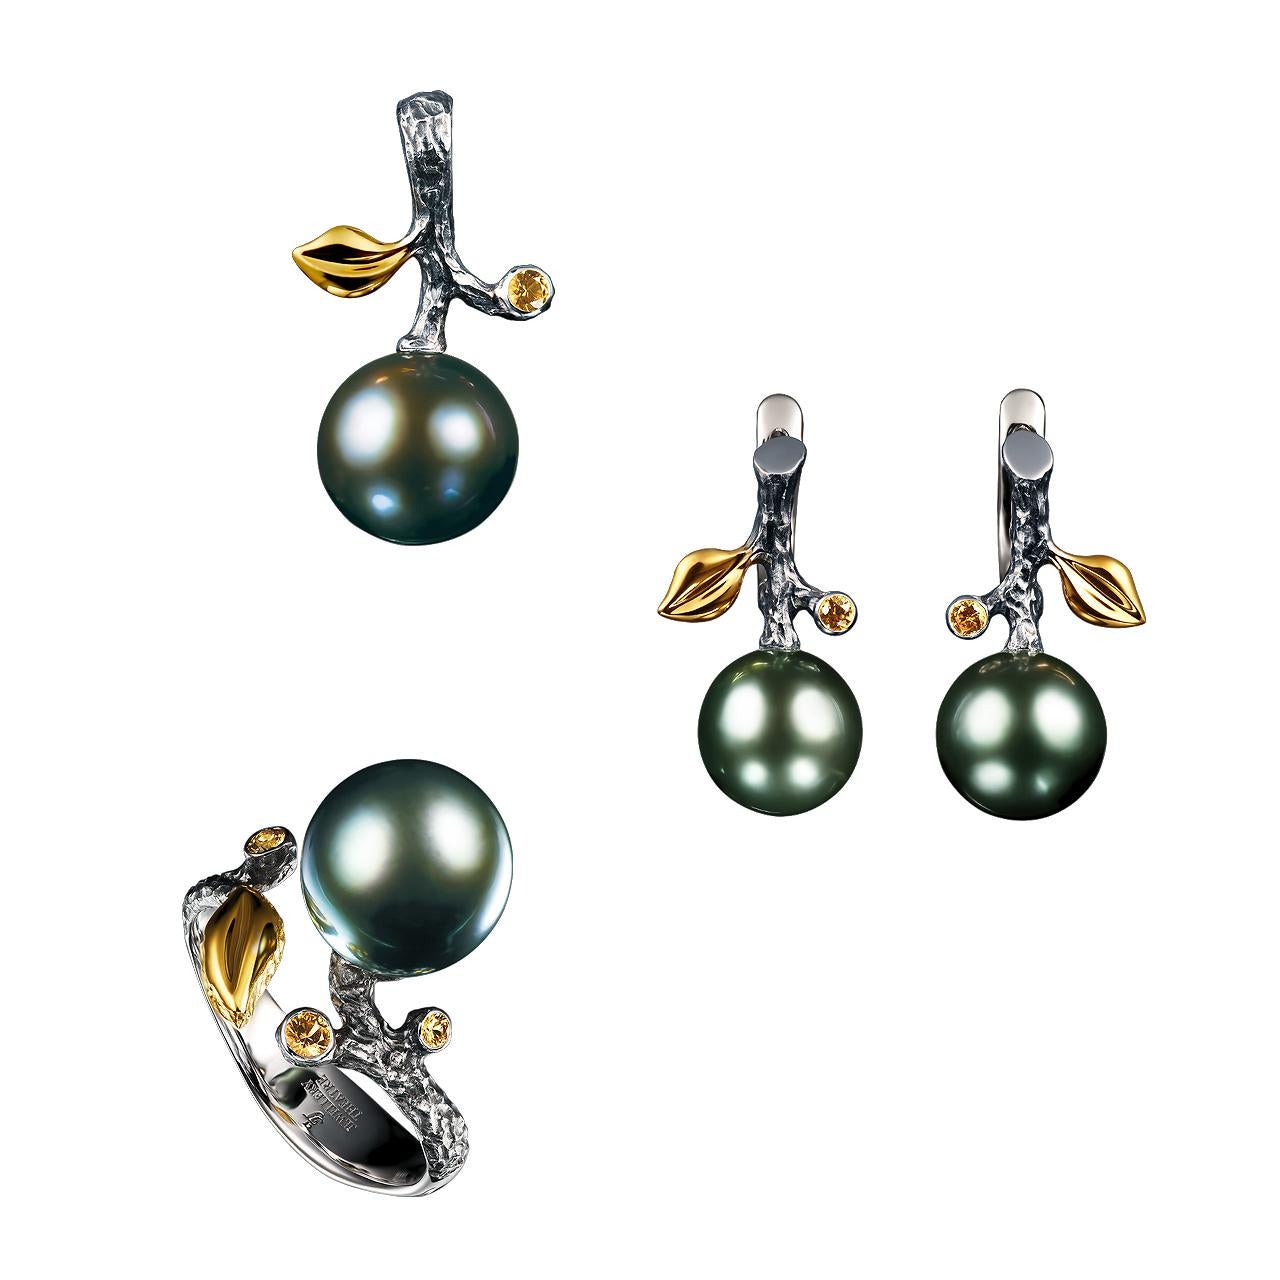 - 1 Round Yellow Sapphire - 0.06 ct
- 11-11.5 mm Dark Tahitian pearl
- 18K White Gold 
- Weight: 3.50 g
The pendant from the Eden collection features a lustrous Dark Tahitian pearl of 10.5-11 mm, accompanied by a yellow sapphire.  
Every piece from